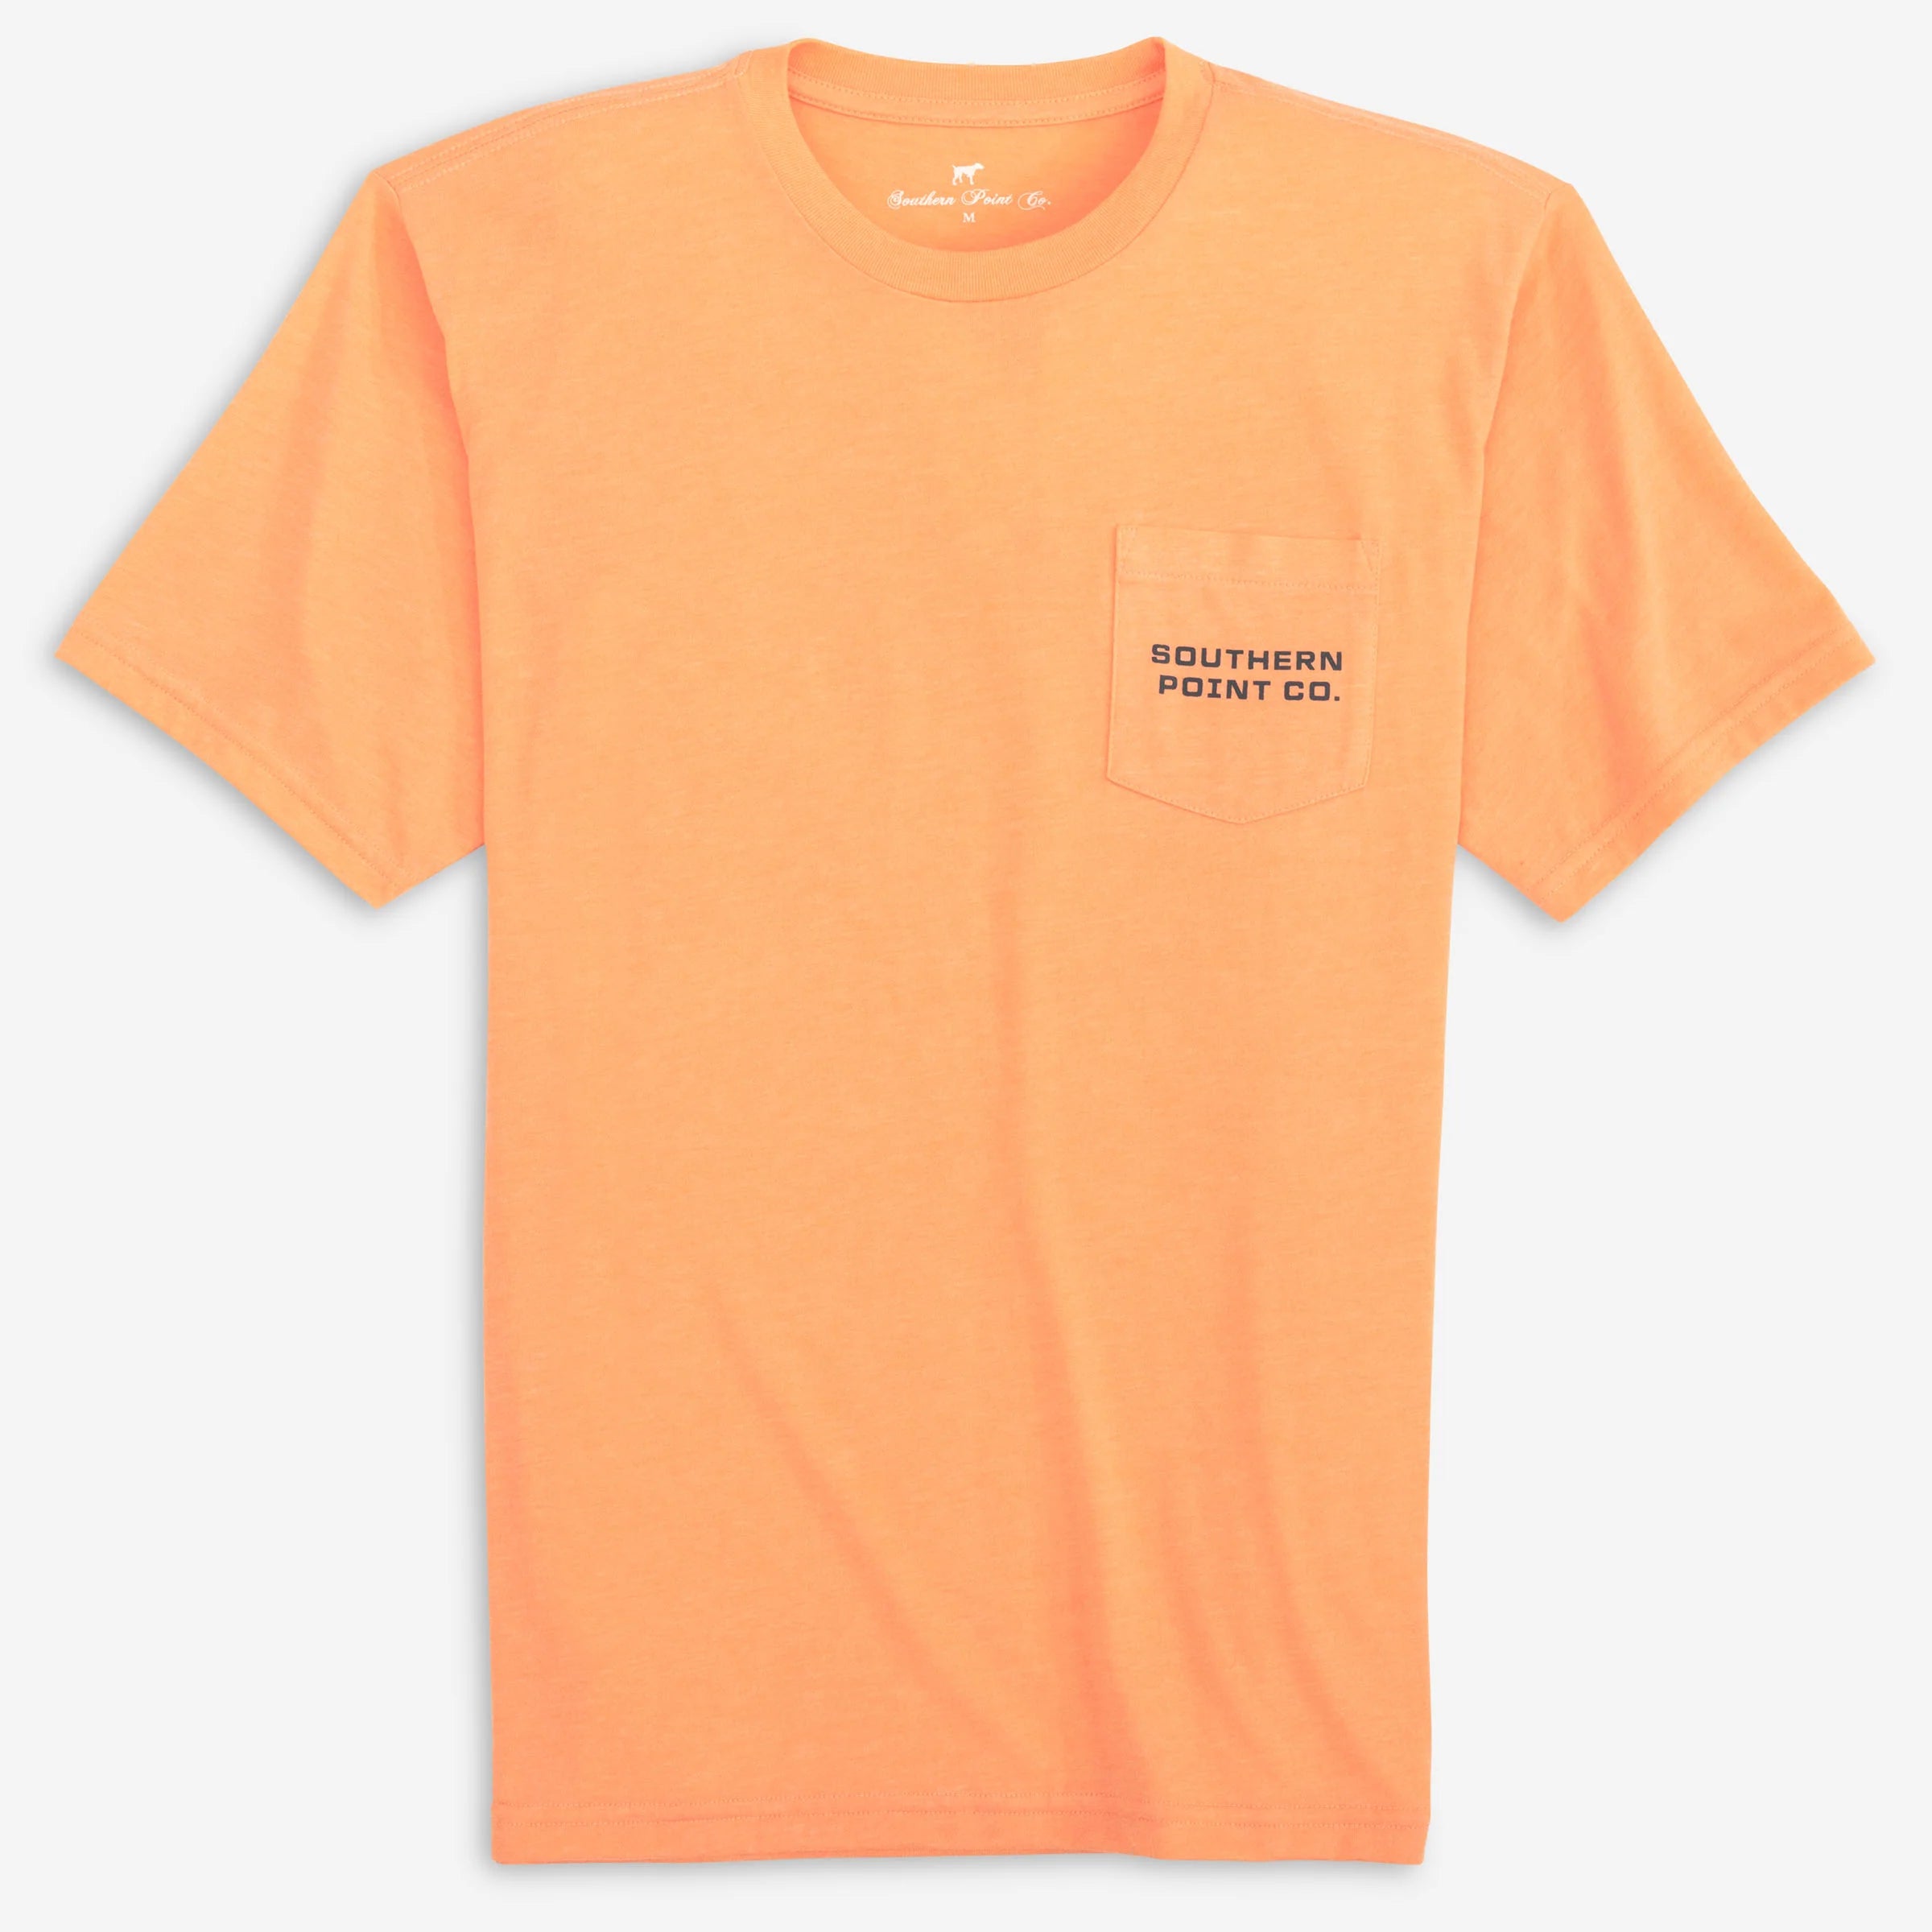 Fish Daze YOUTH Tee by Southern Point Co.